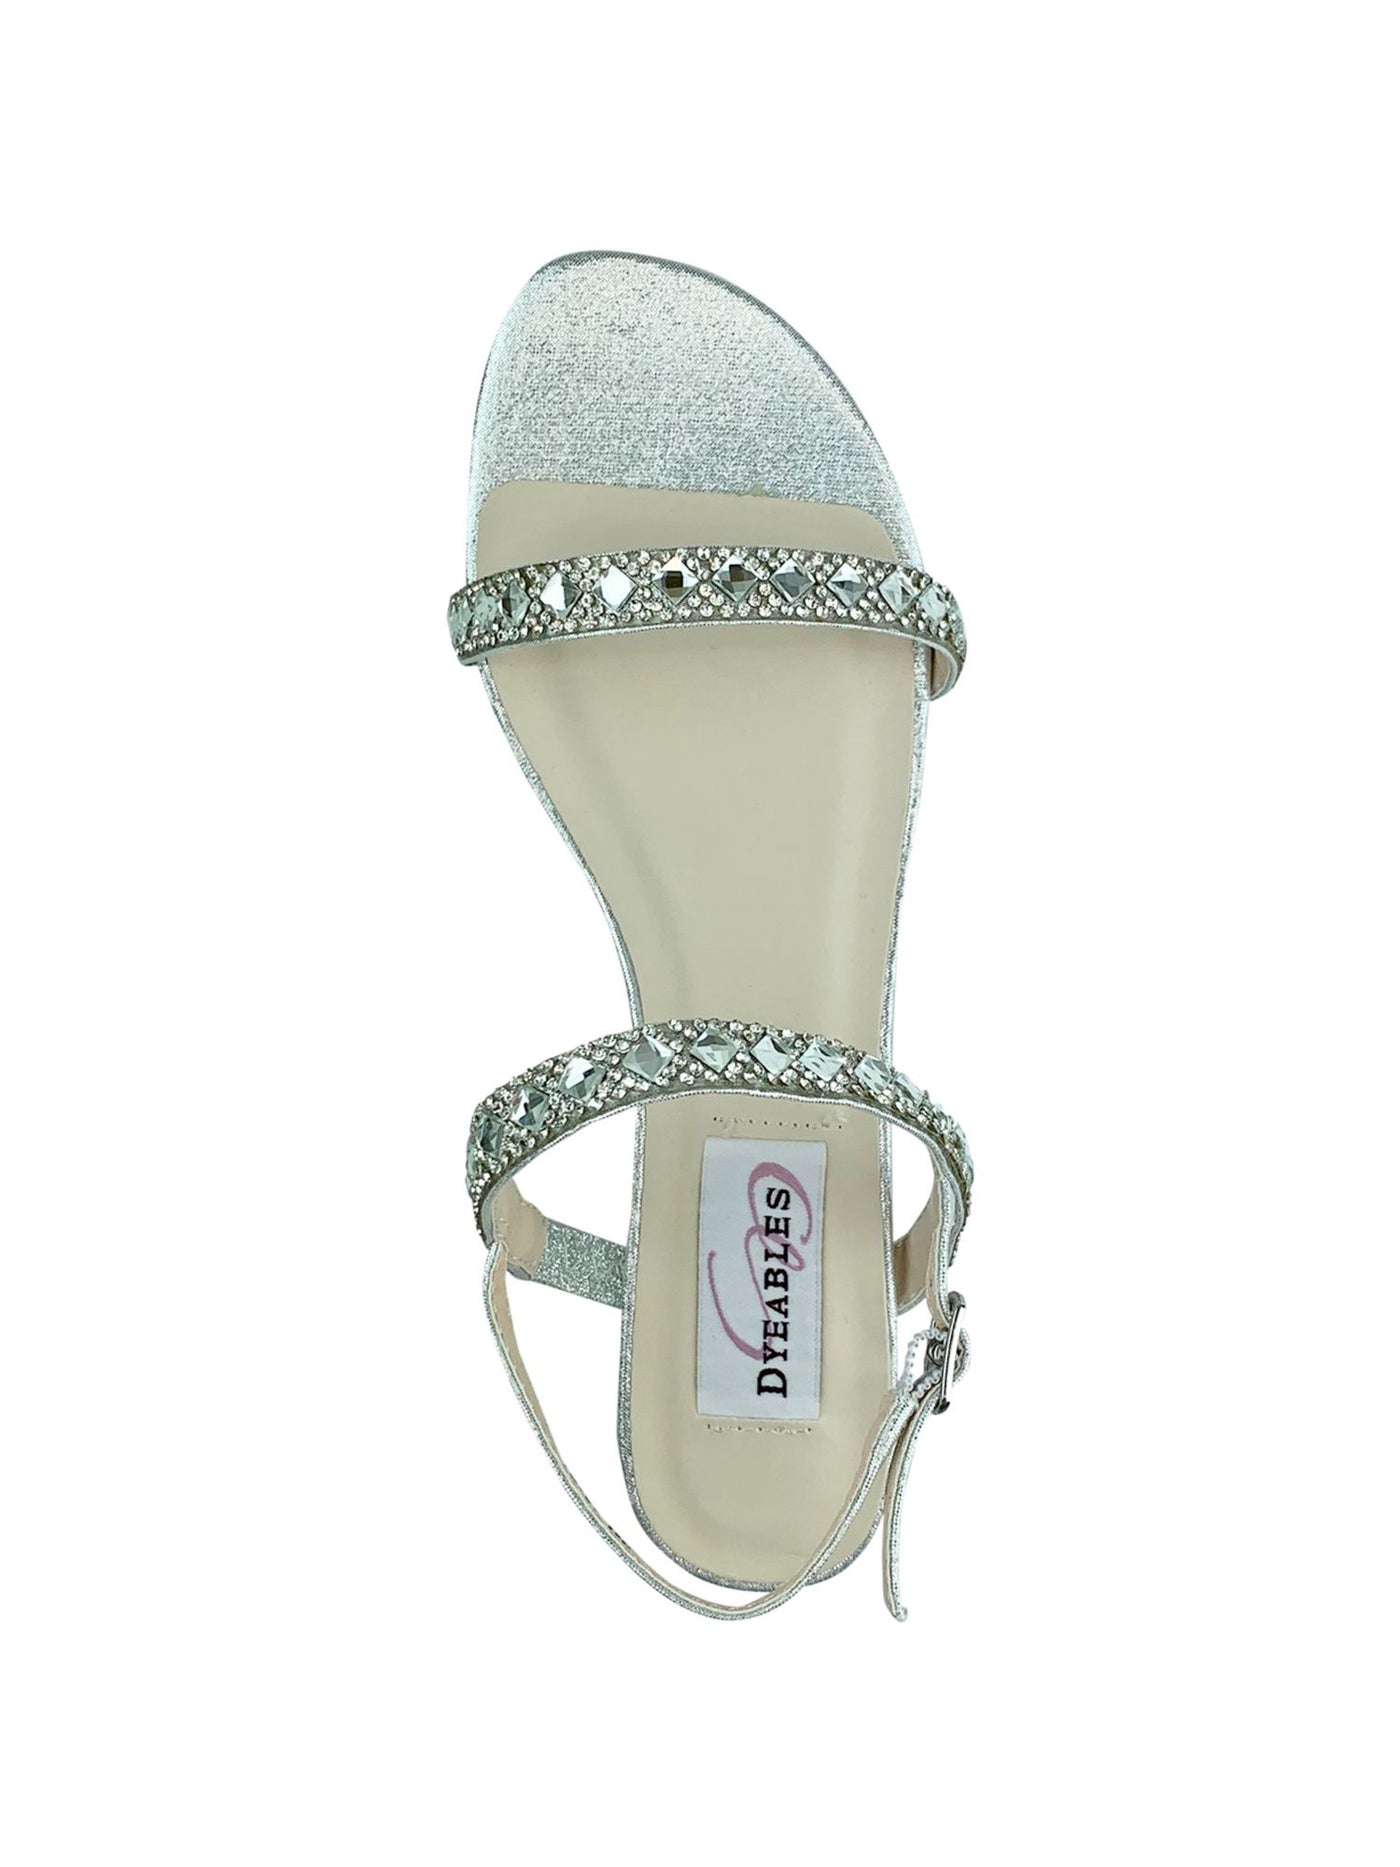 BENJAMIN WALK Womens Silver Adjustable Strap Stone Accent Jasmine Round Toe Wedge Buckle Sandals Shoes 9.5